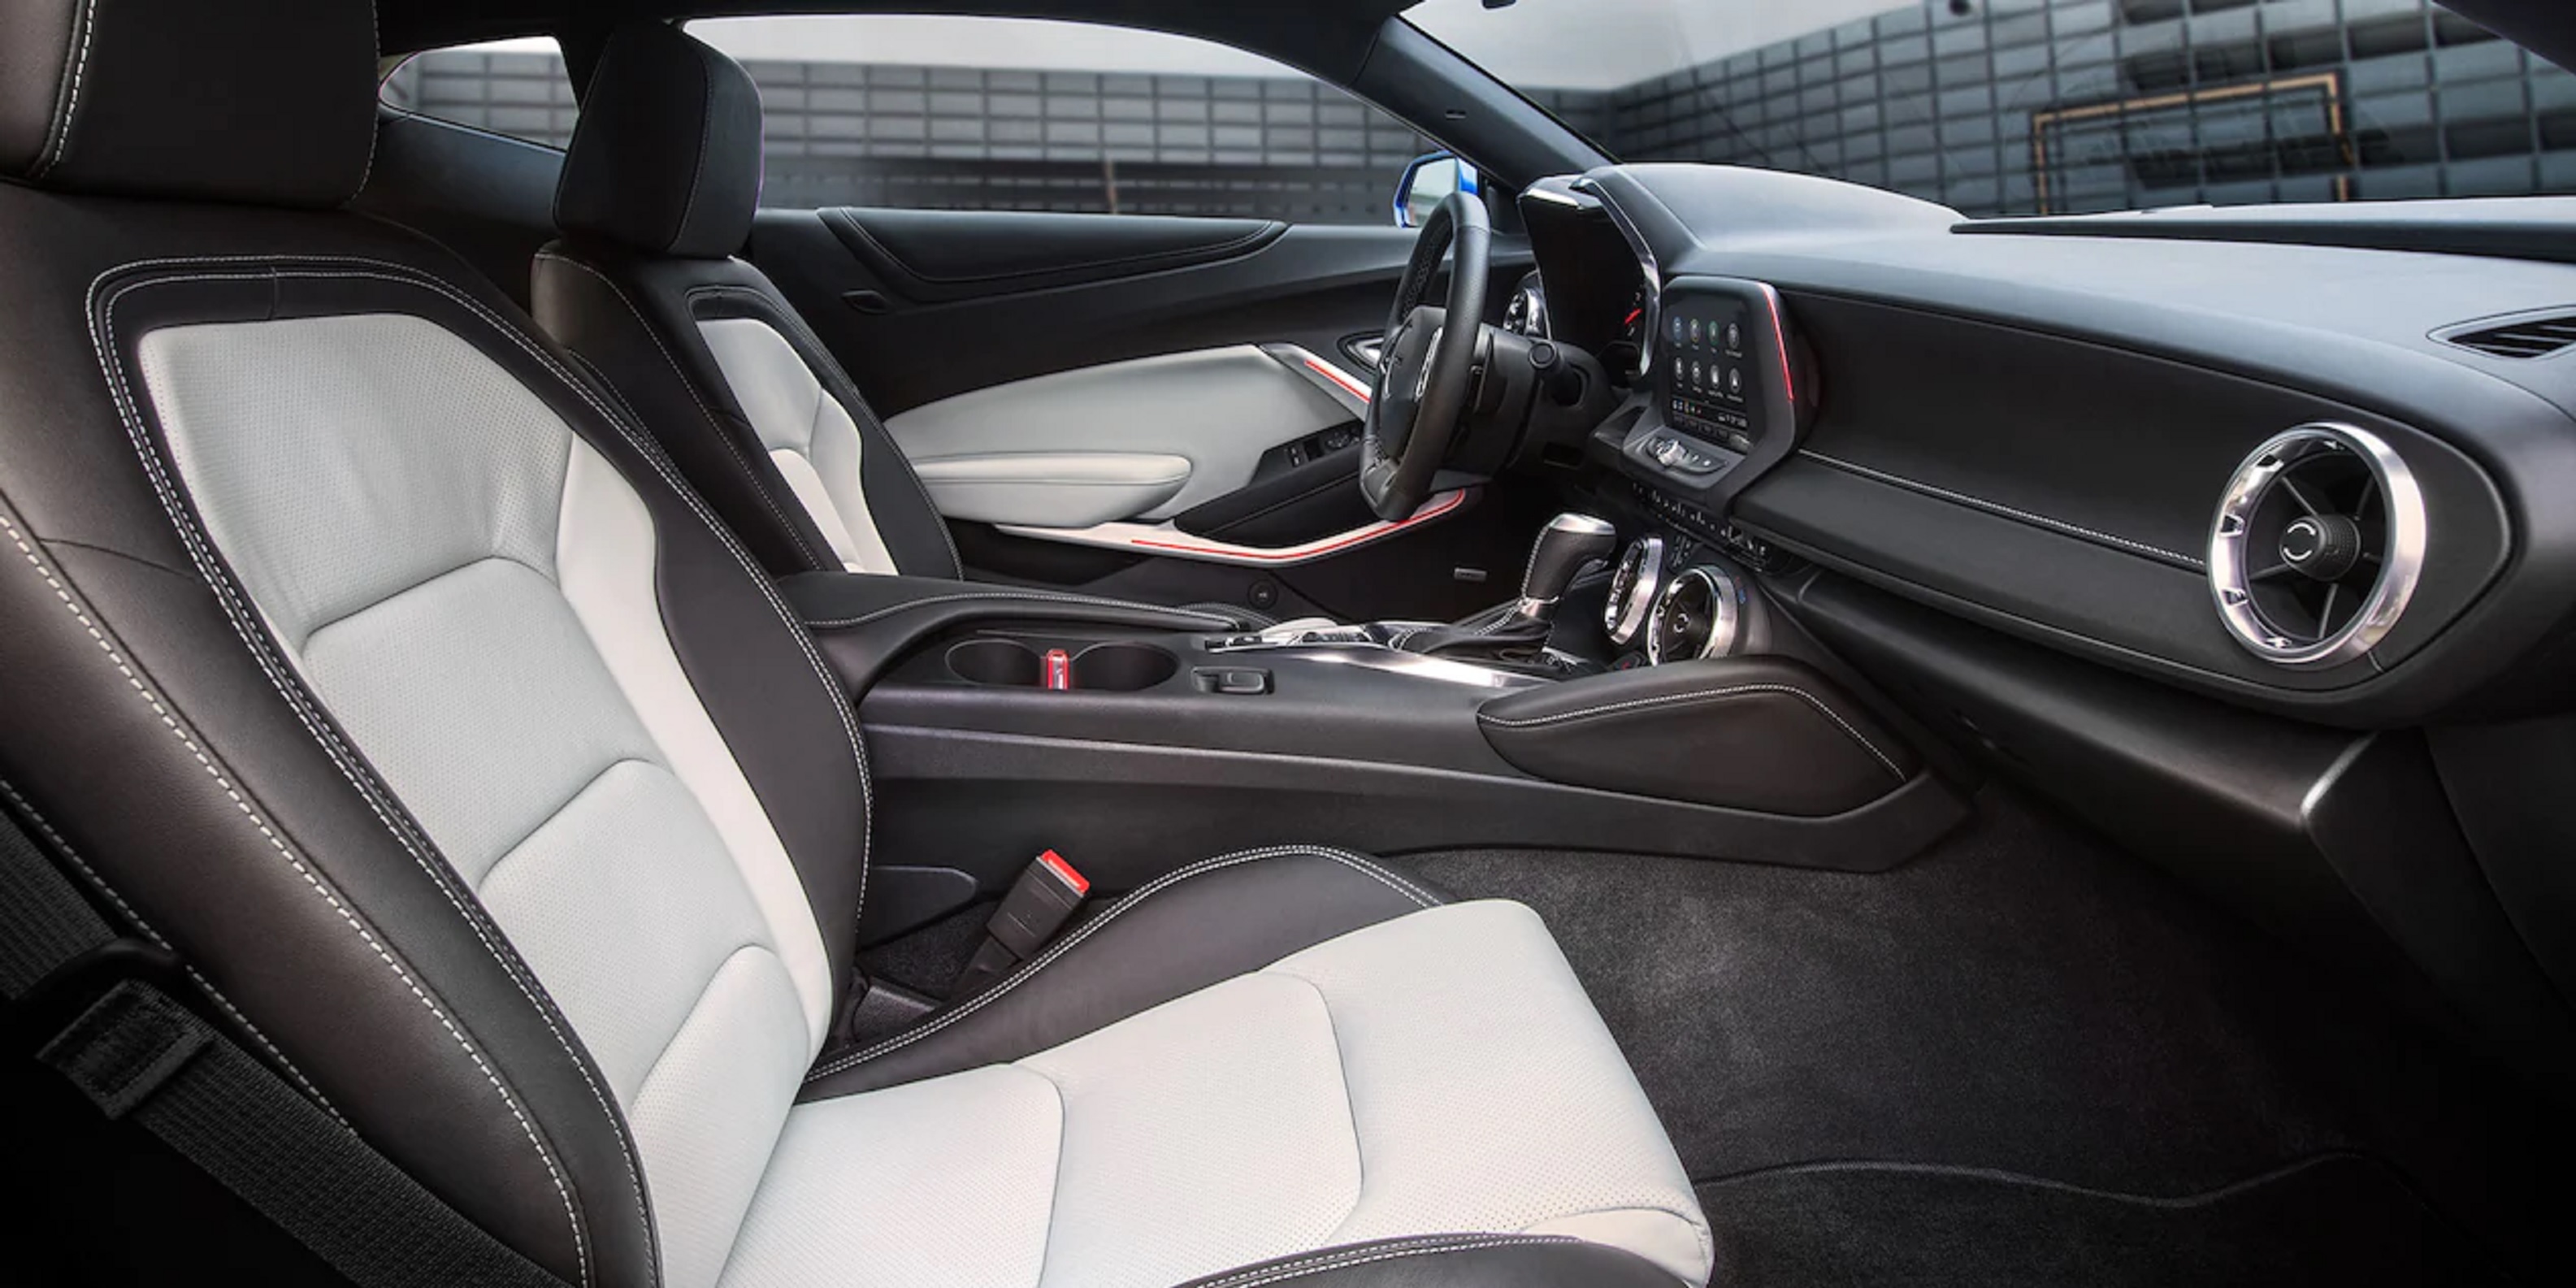 Black and white front seats and dashboard of a 2022 Chevrolet Camaro seen from the side